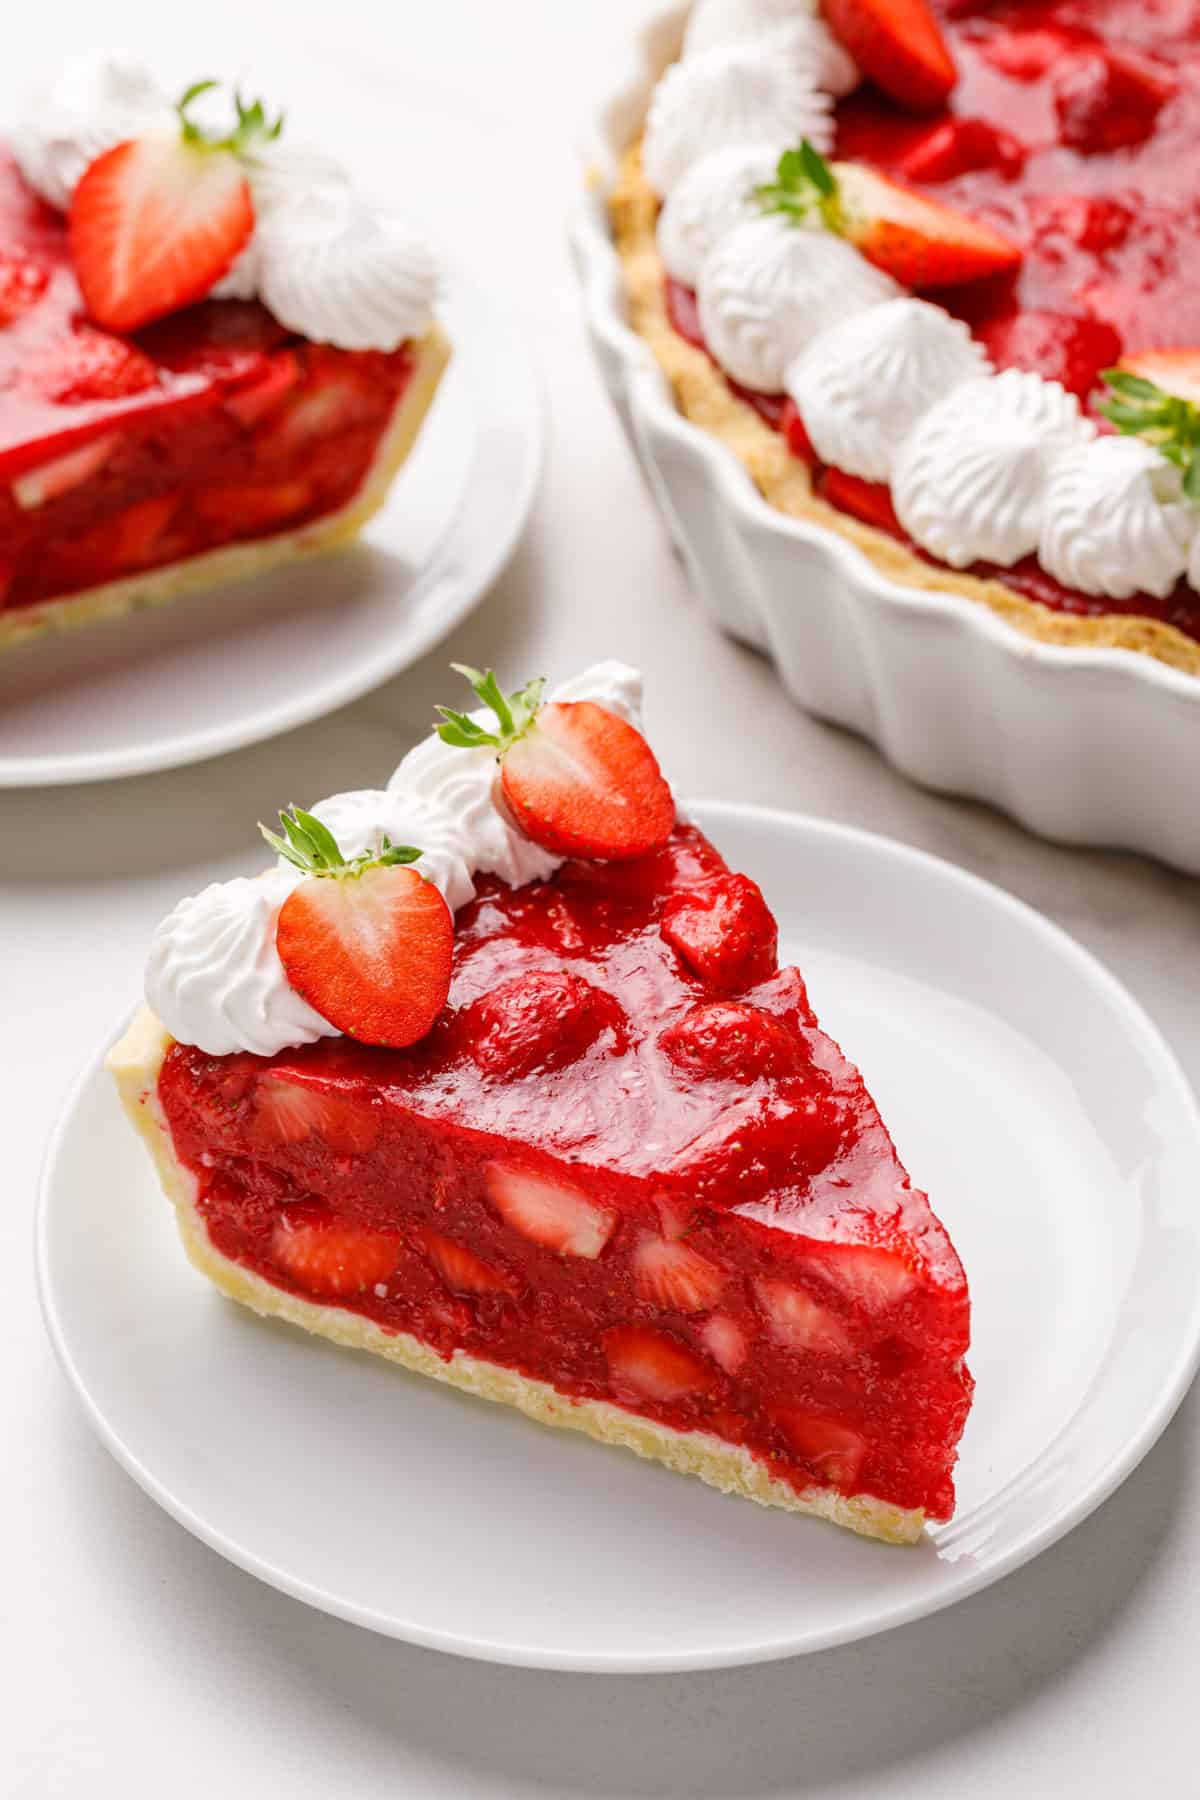 slice of strawberry pie topped with halved strawberries and chantilly cream